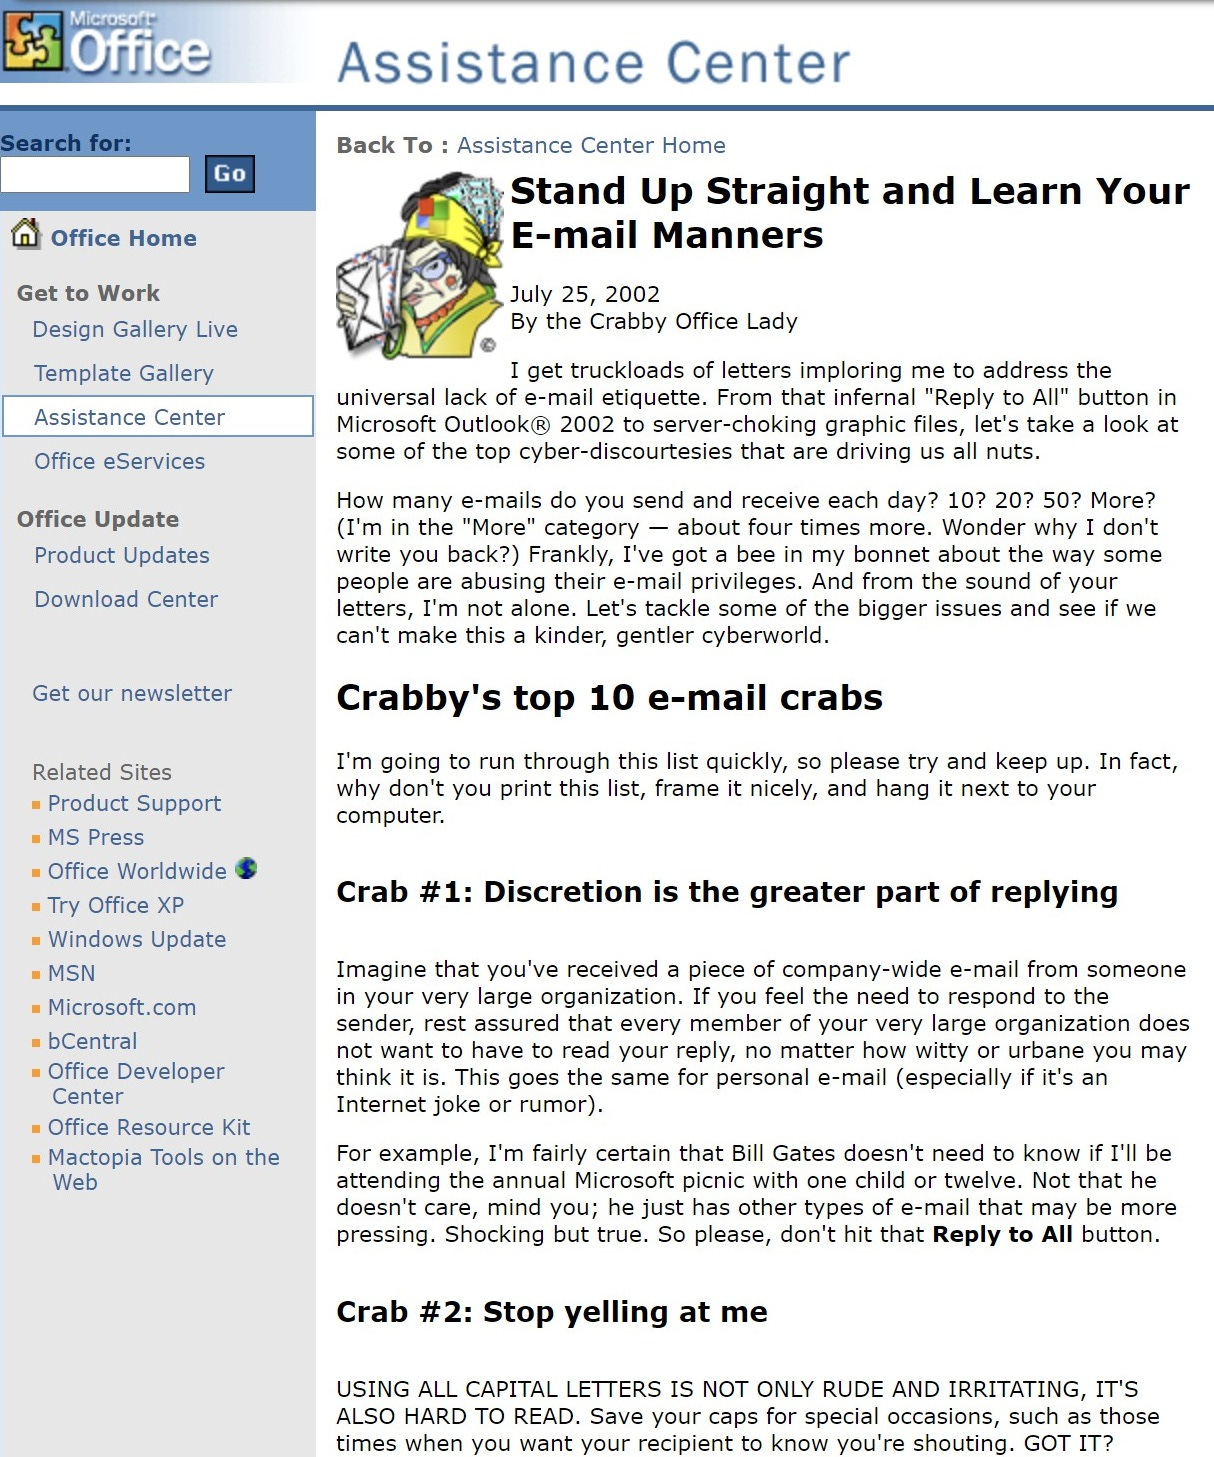 Example web page of the Crabby Office lady from July 25, 2002 showing a how to article.